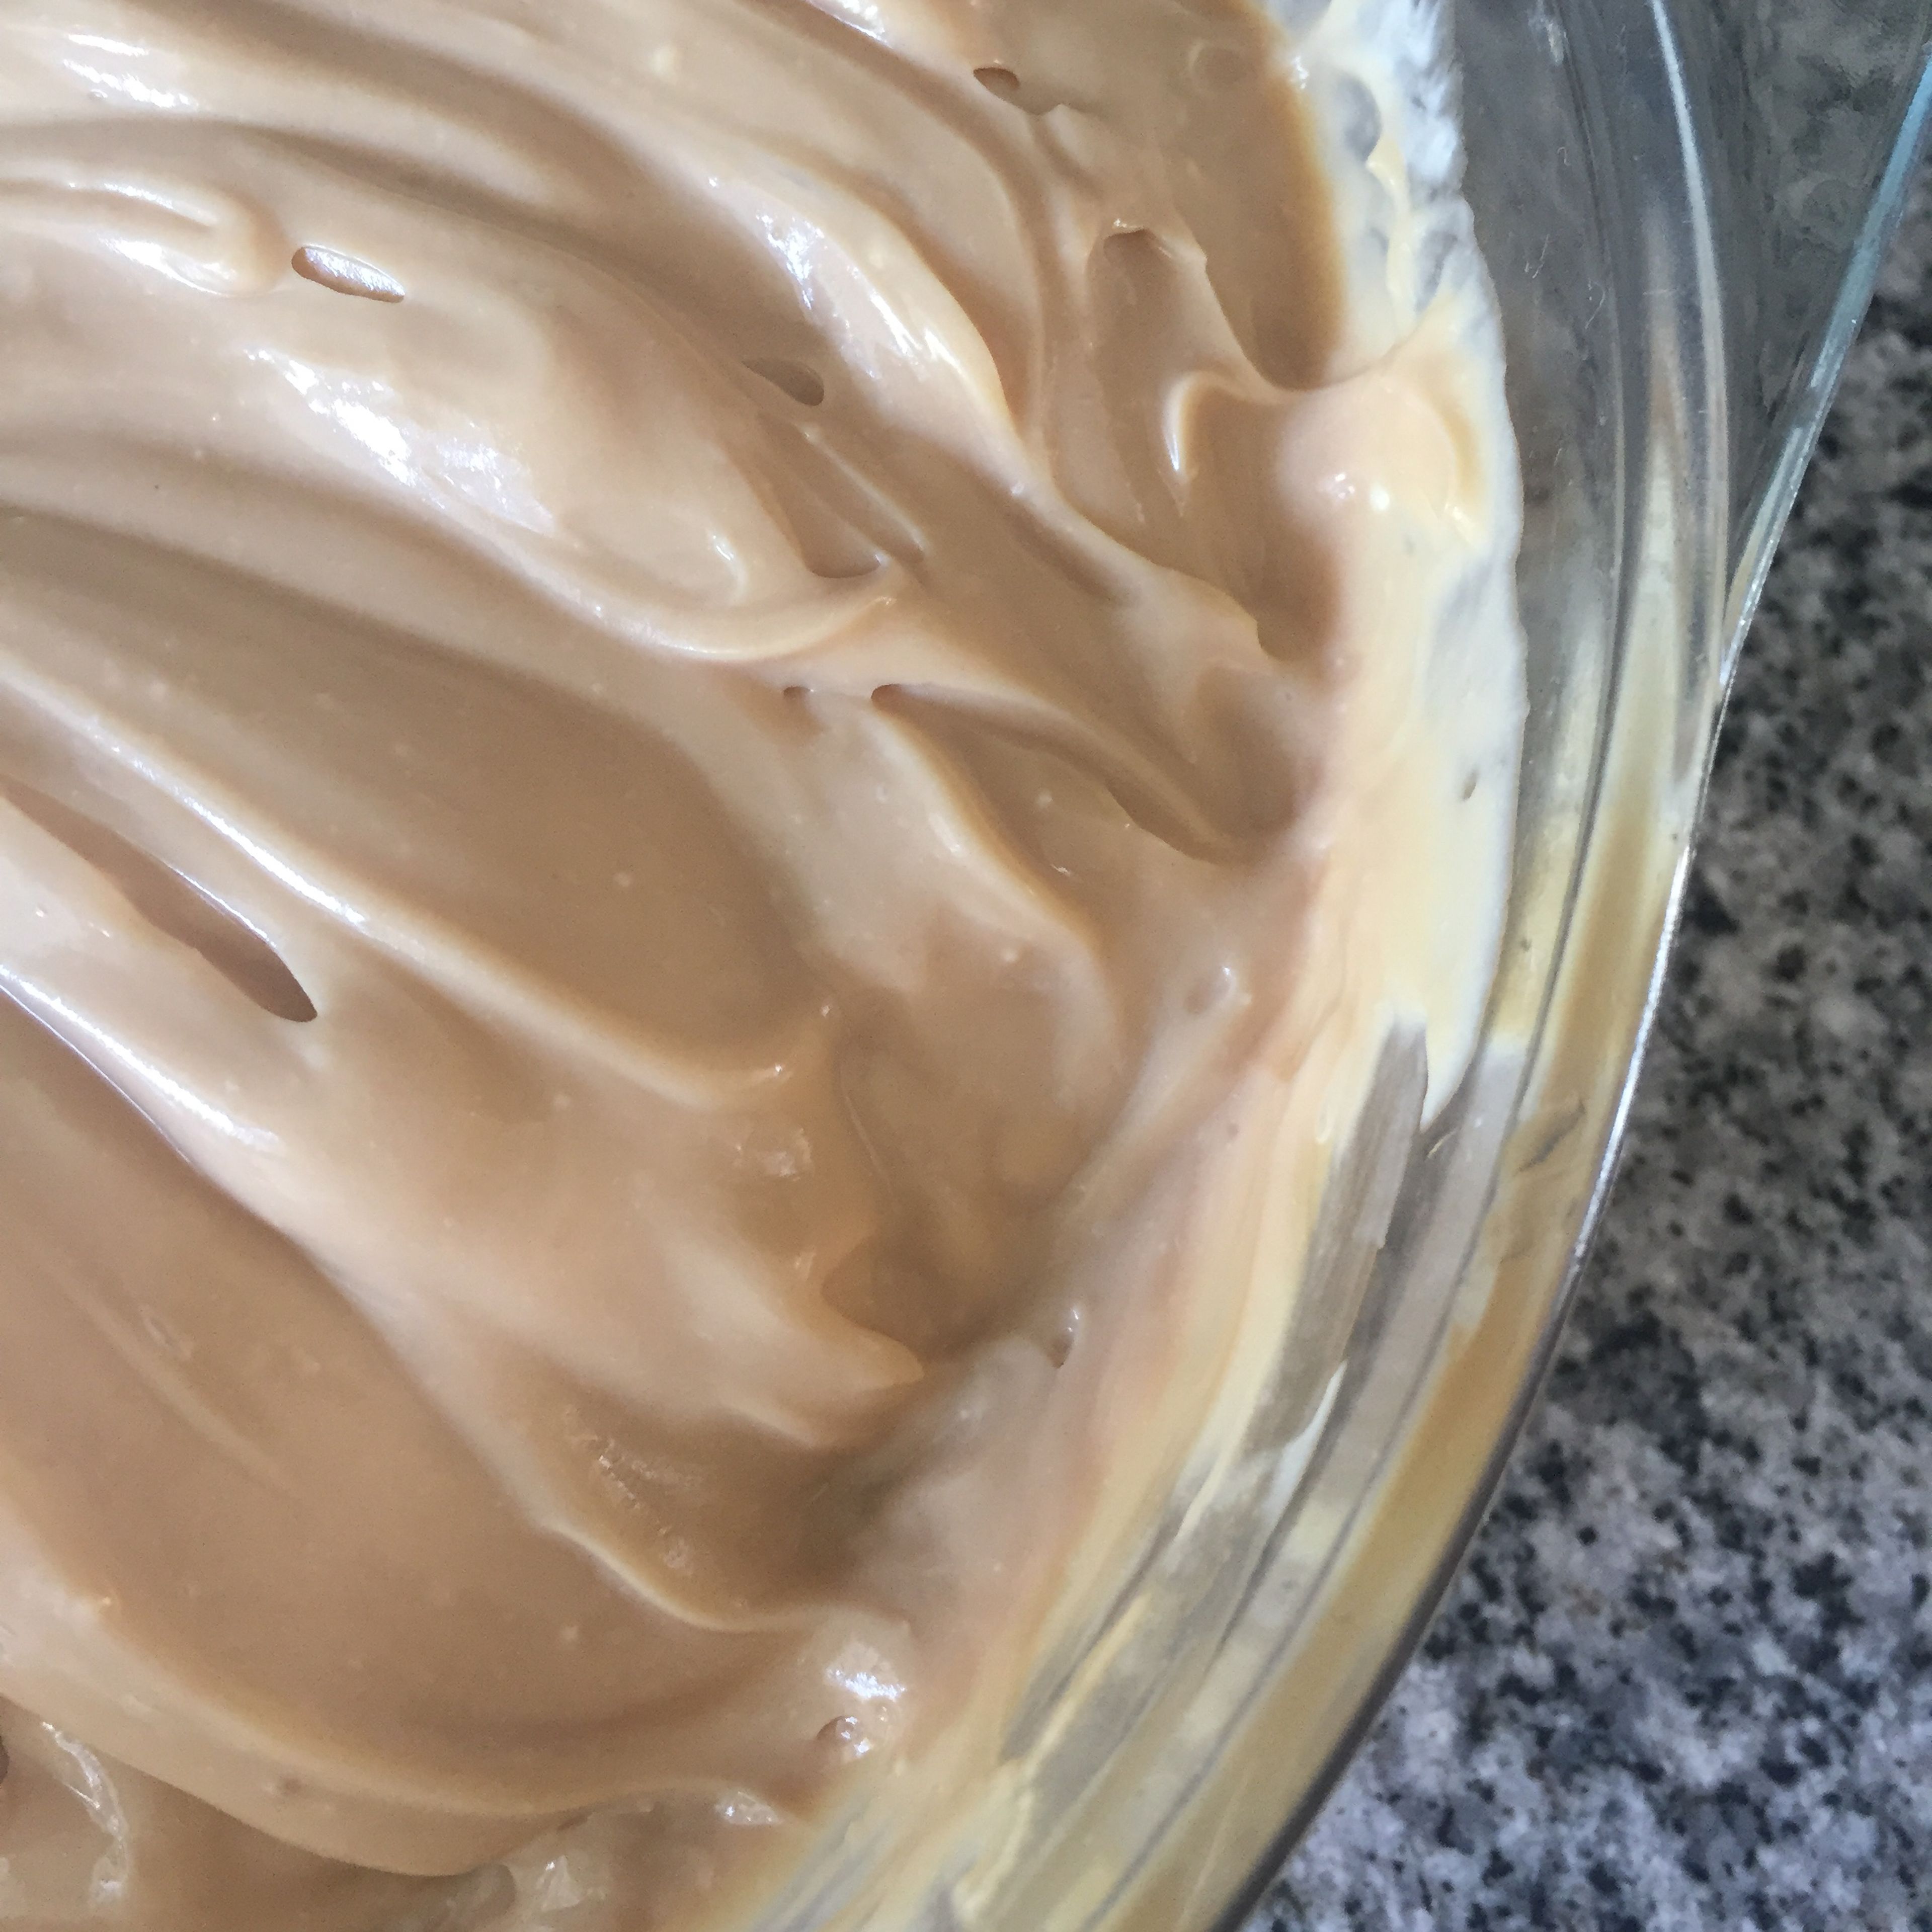 Stir together cream cheese and dulce de leche until all combined. Different brands of dulce de leche might change the color or consistence of the filling. 